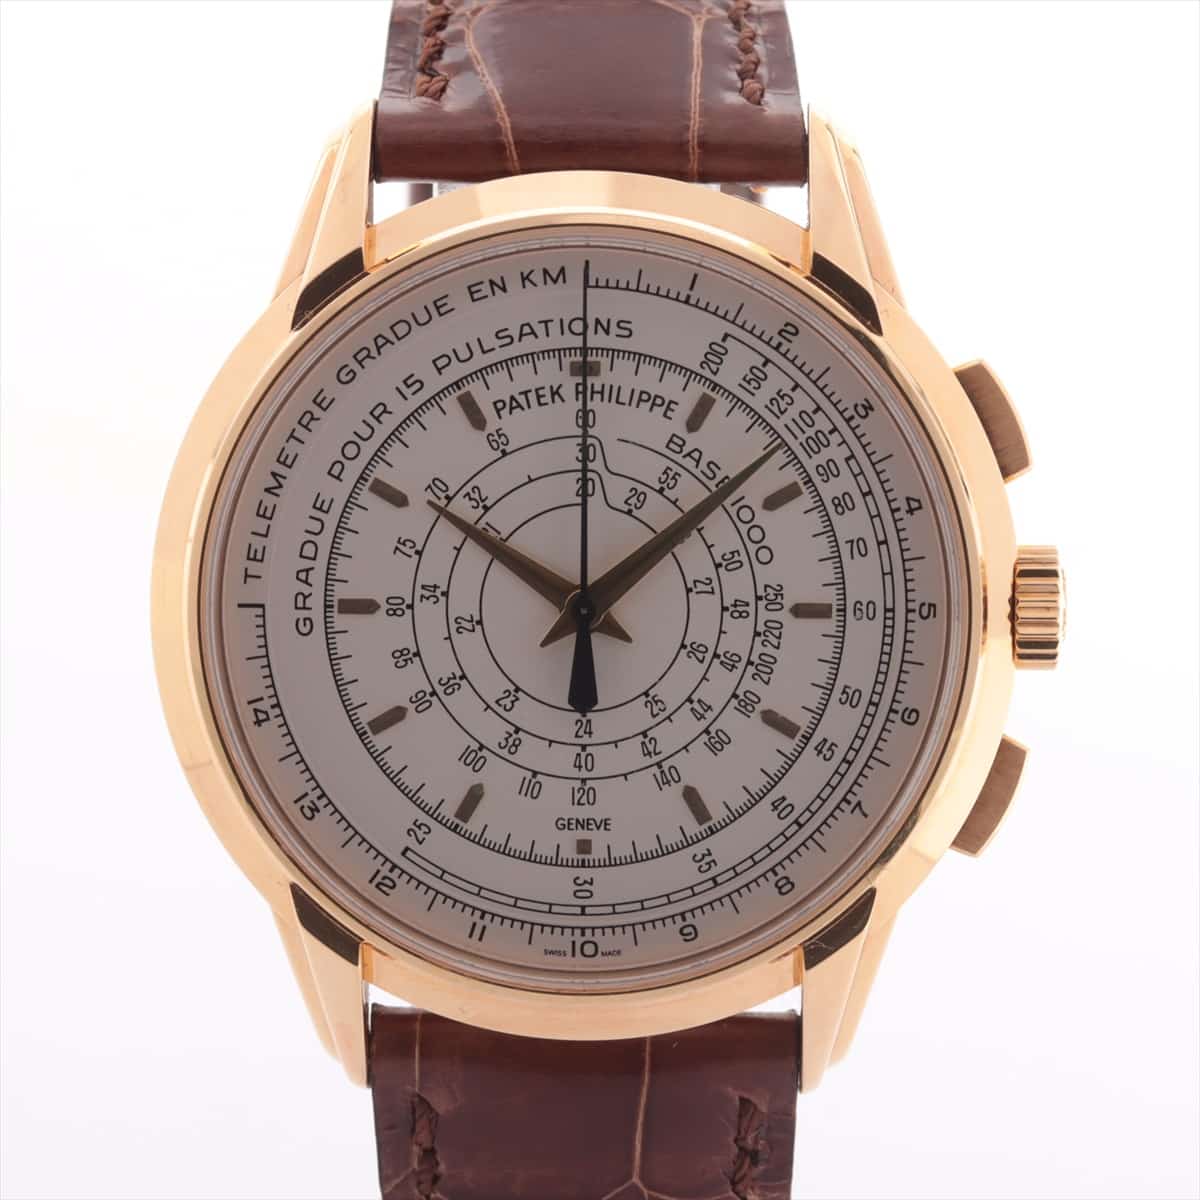 Patek Philippe Multi-scale Chronograph 5975J-001 750 & leather AT White-Face